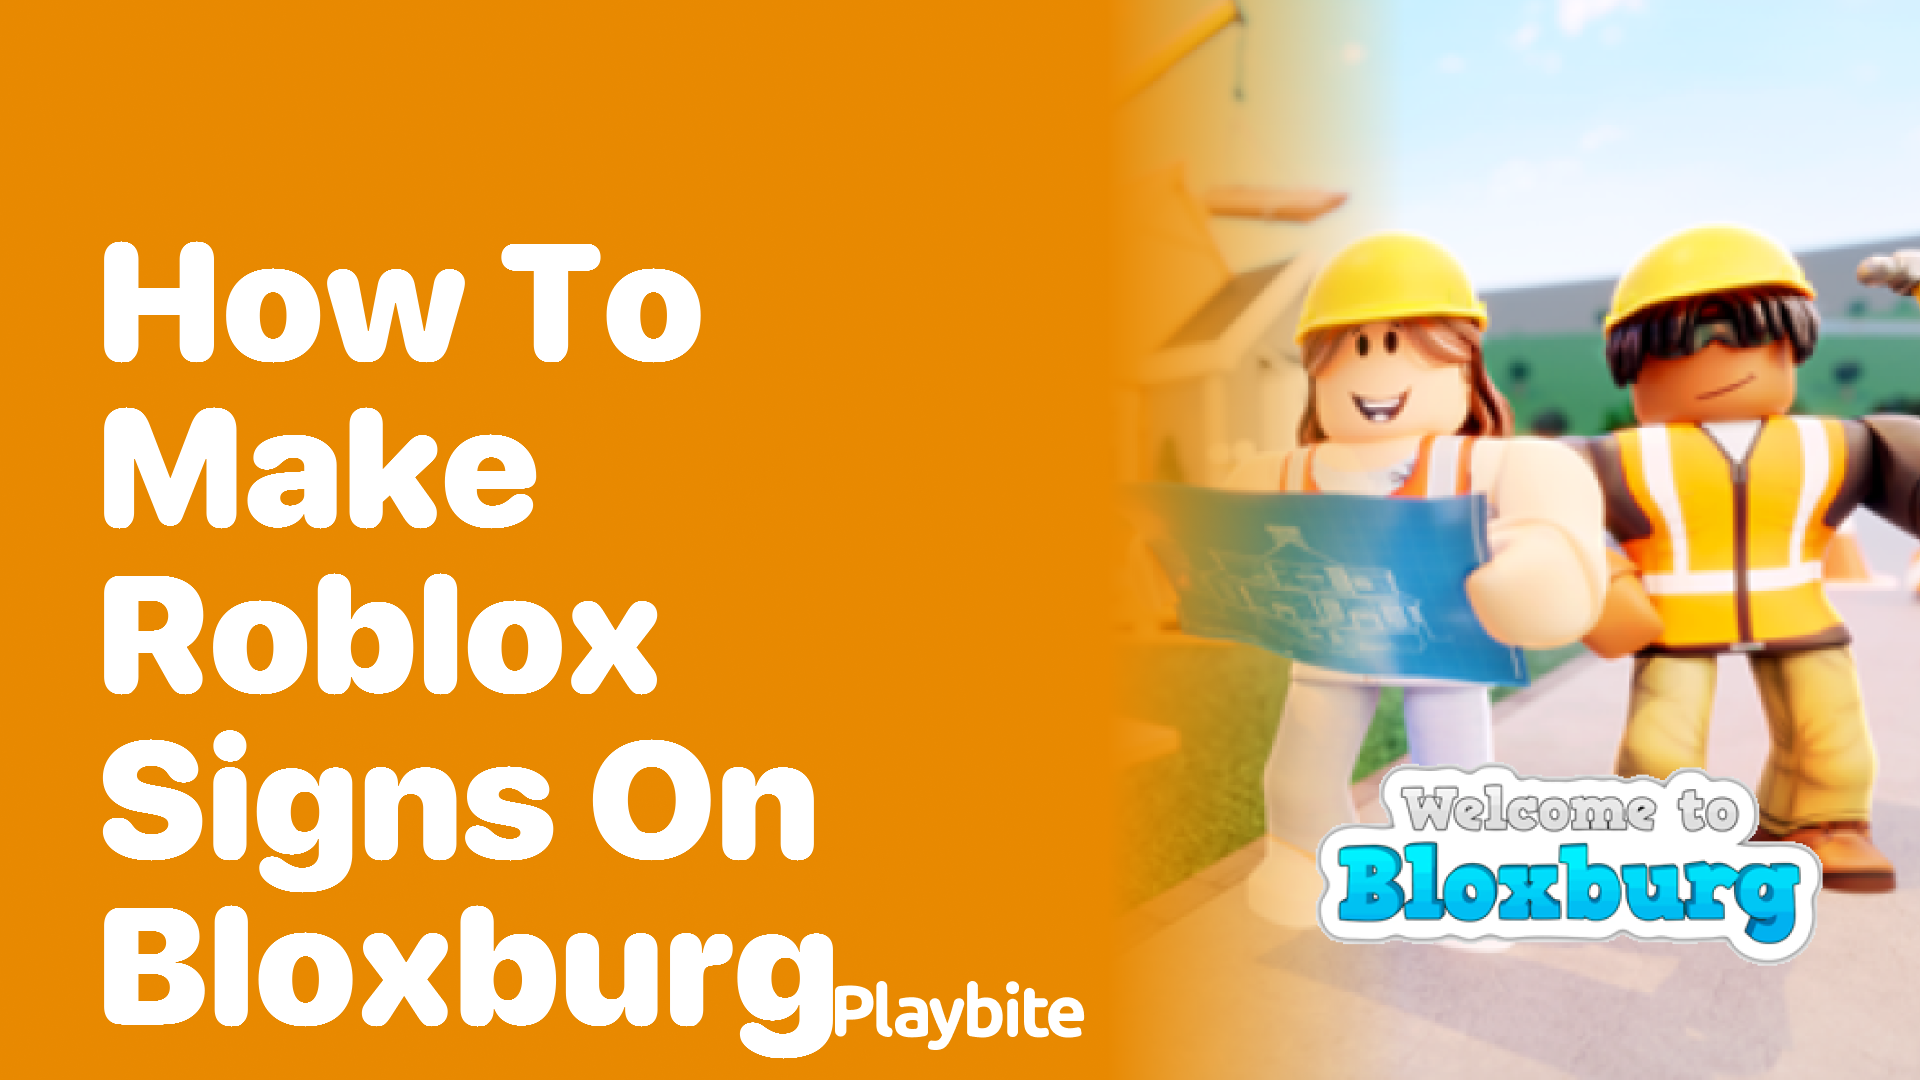 How to Make Roblox Signs on Bloxburg: A Quick Guide